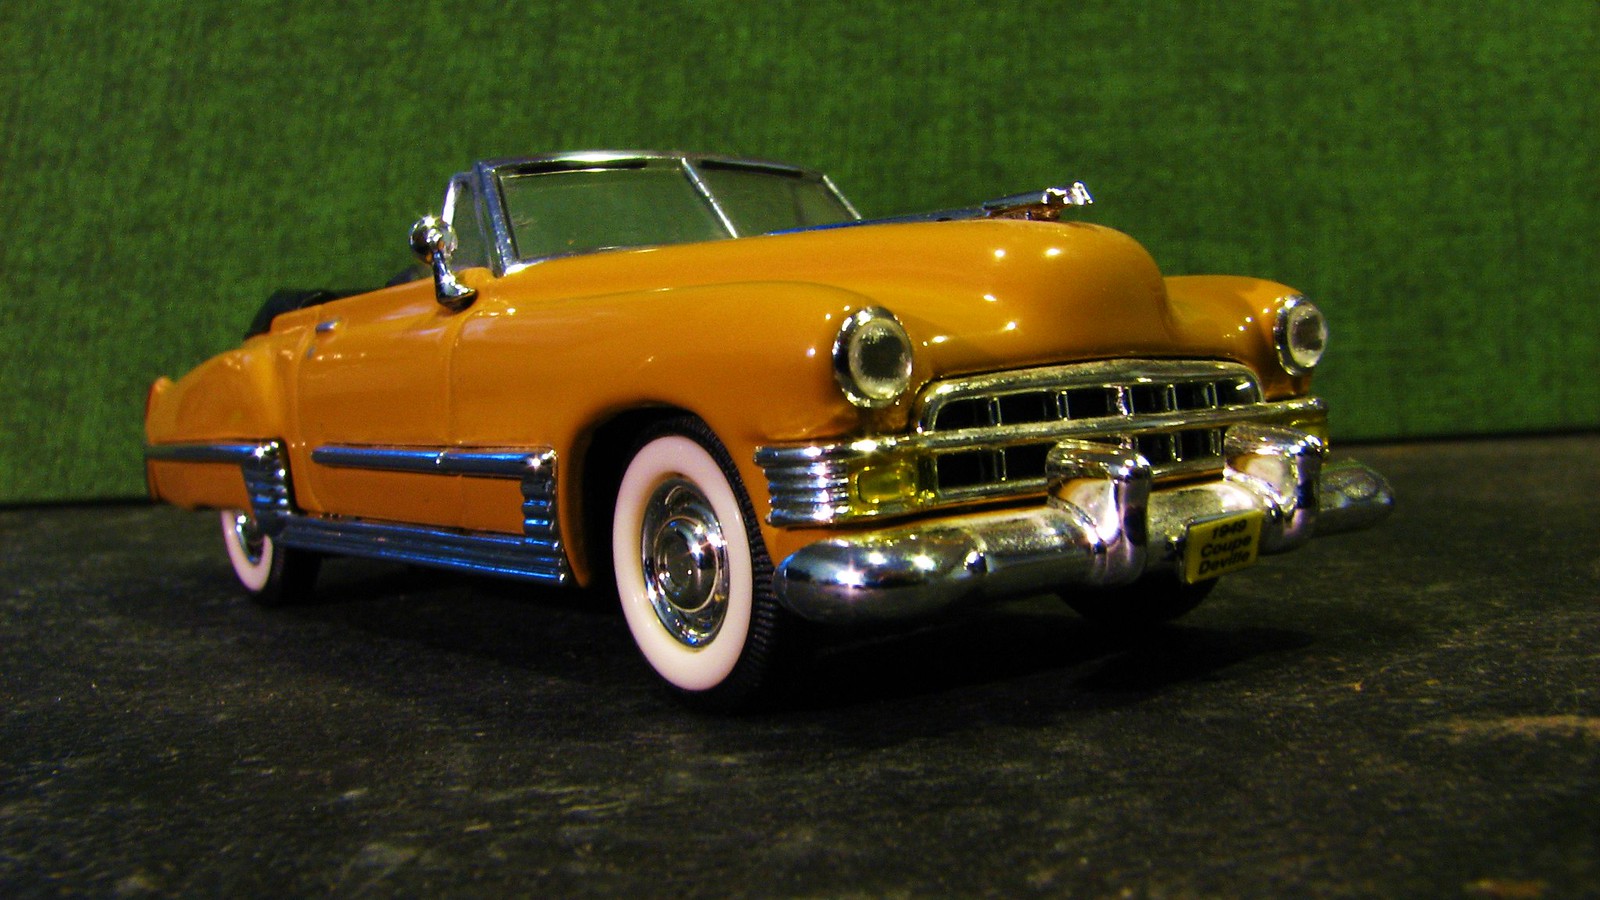 A 1/43 SCALE 1949 CADILLAC COUPE DEVILLE | This is one of th… | Flickr